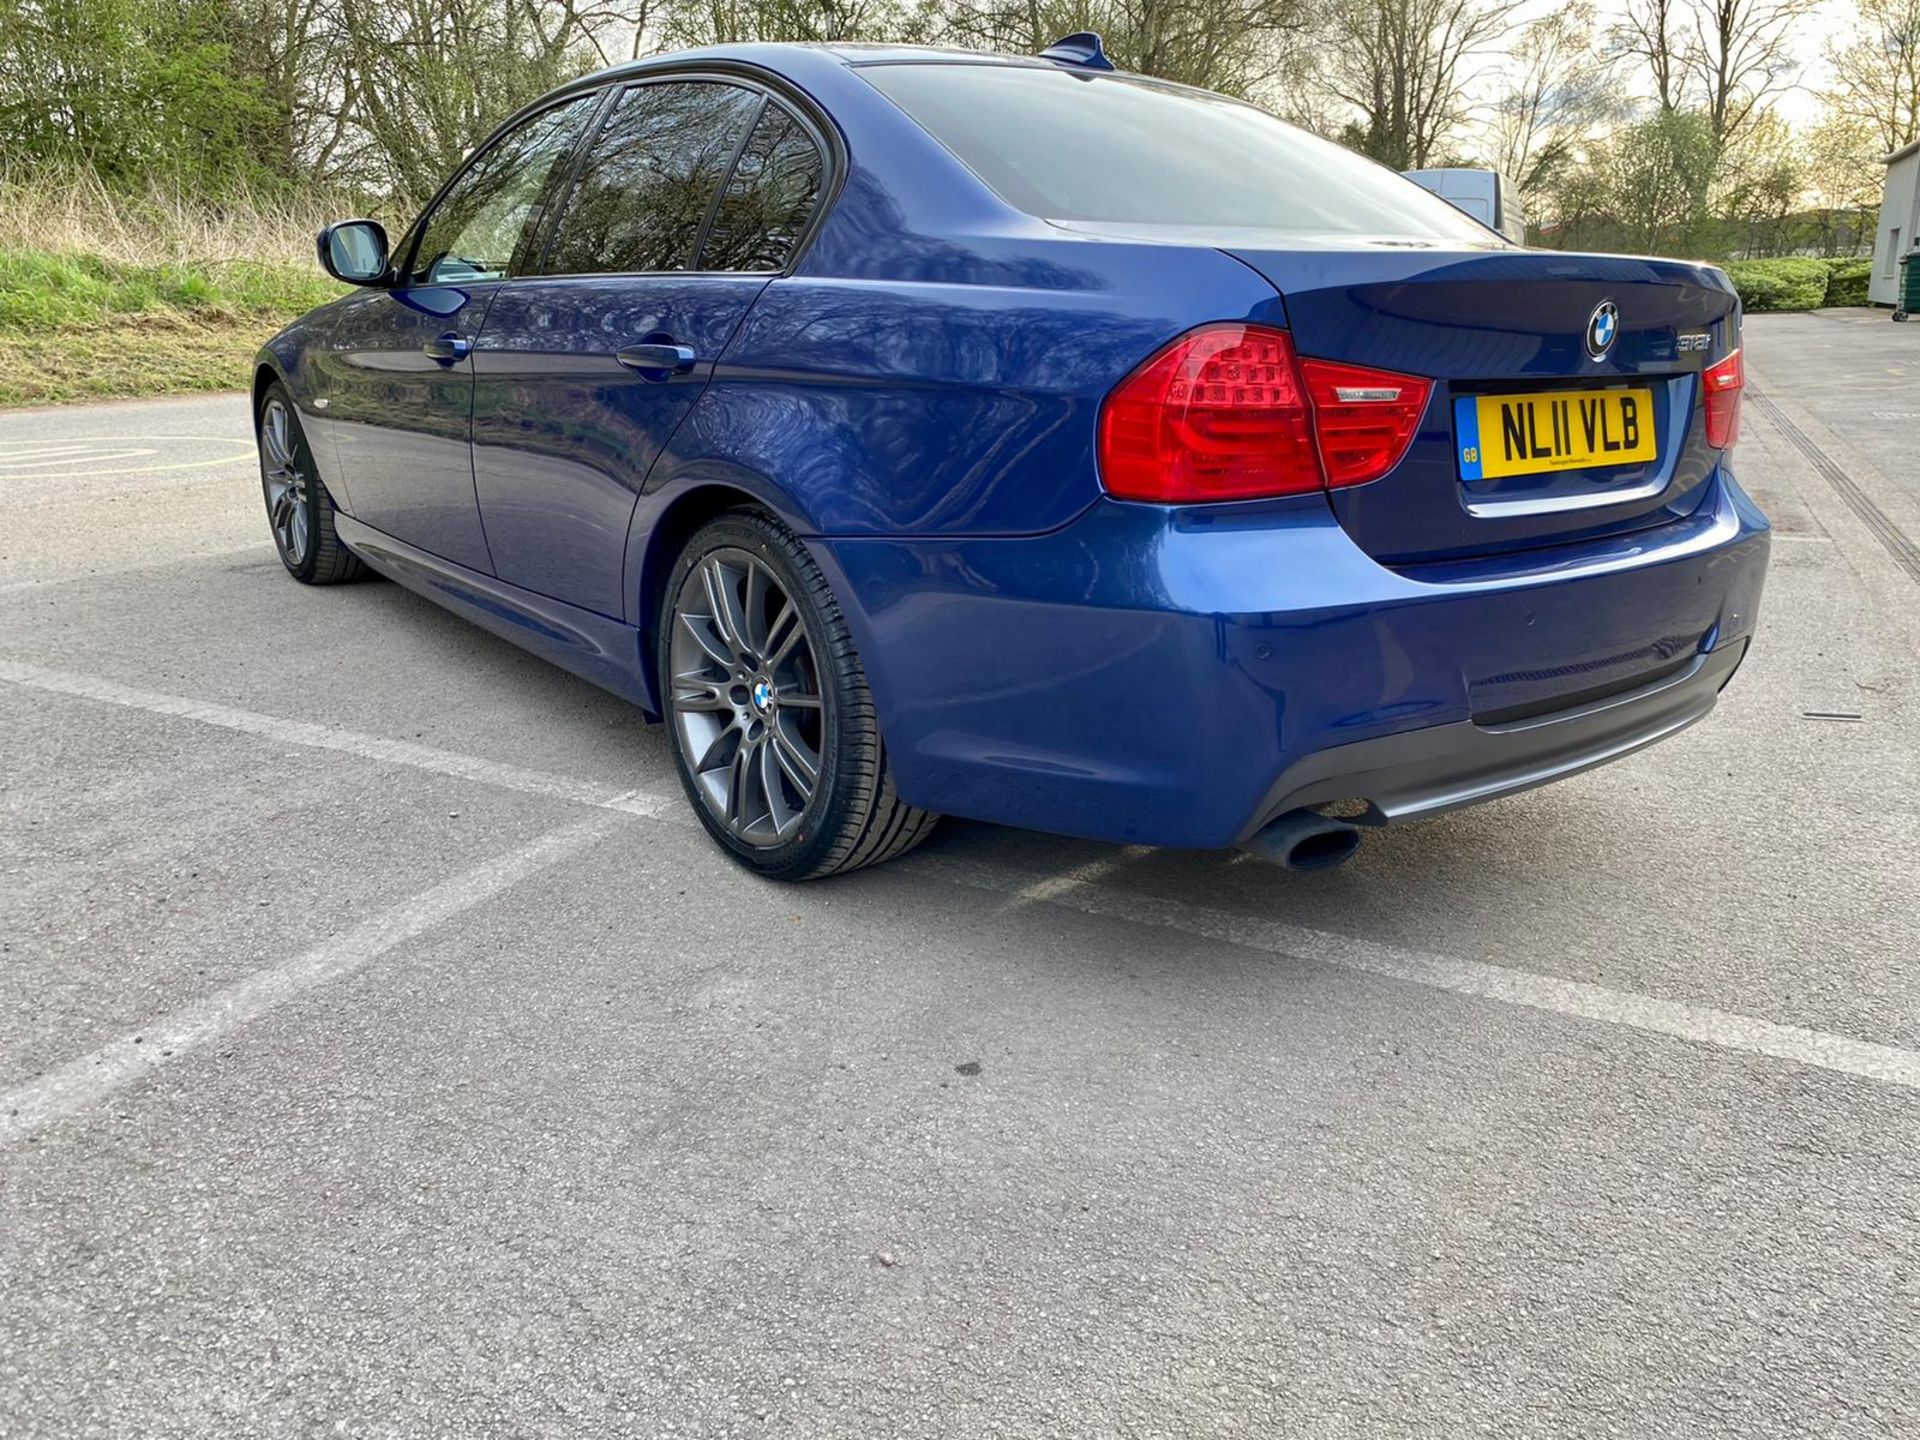 2011 BMW 318I SPORT PLUS EDITION BLUE SALOON, NEW TMING CHAIN, NEW 2 PIECE CLUTCH KIT *NO VAT* - Image 4 of 15